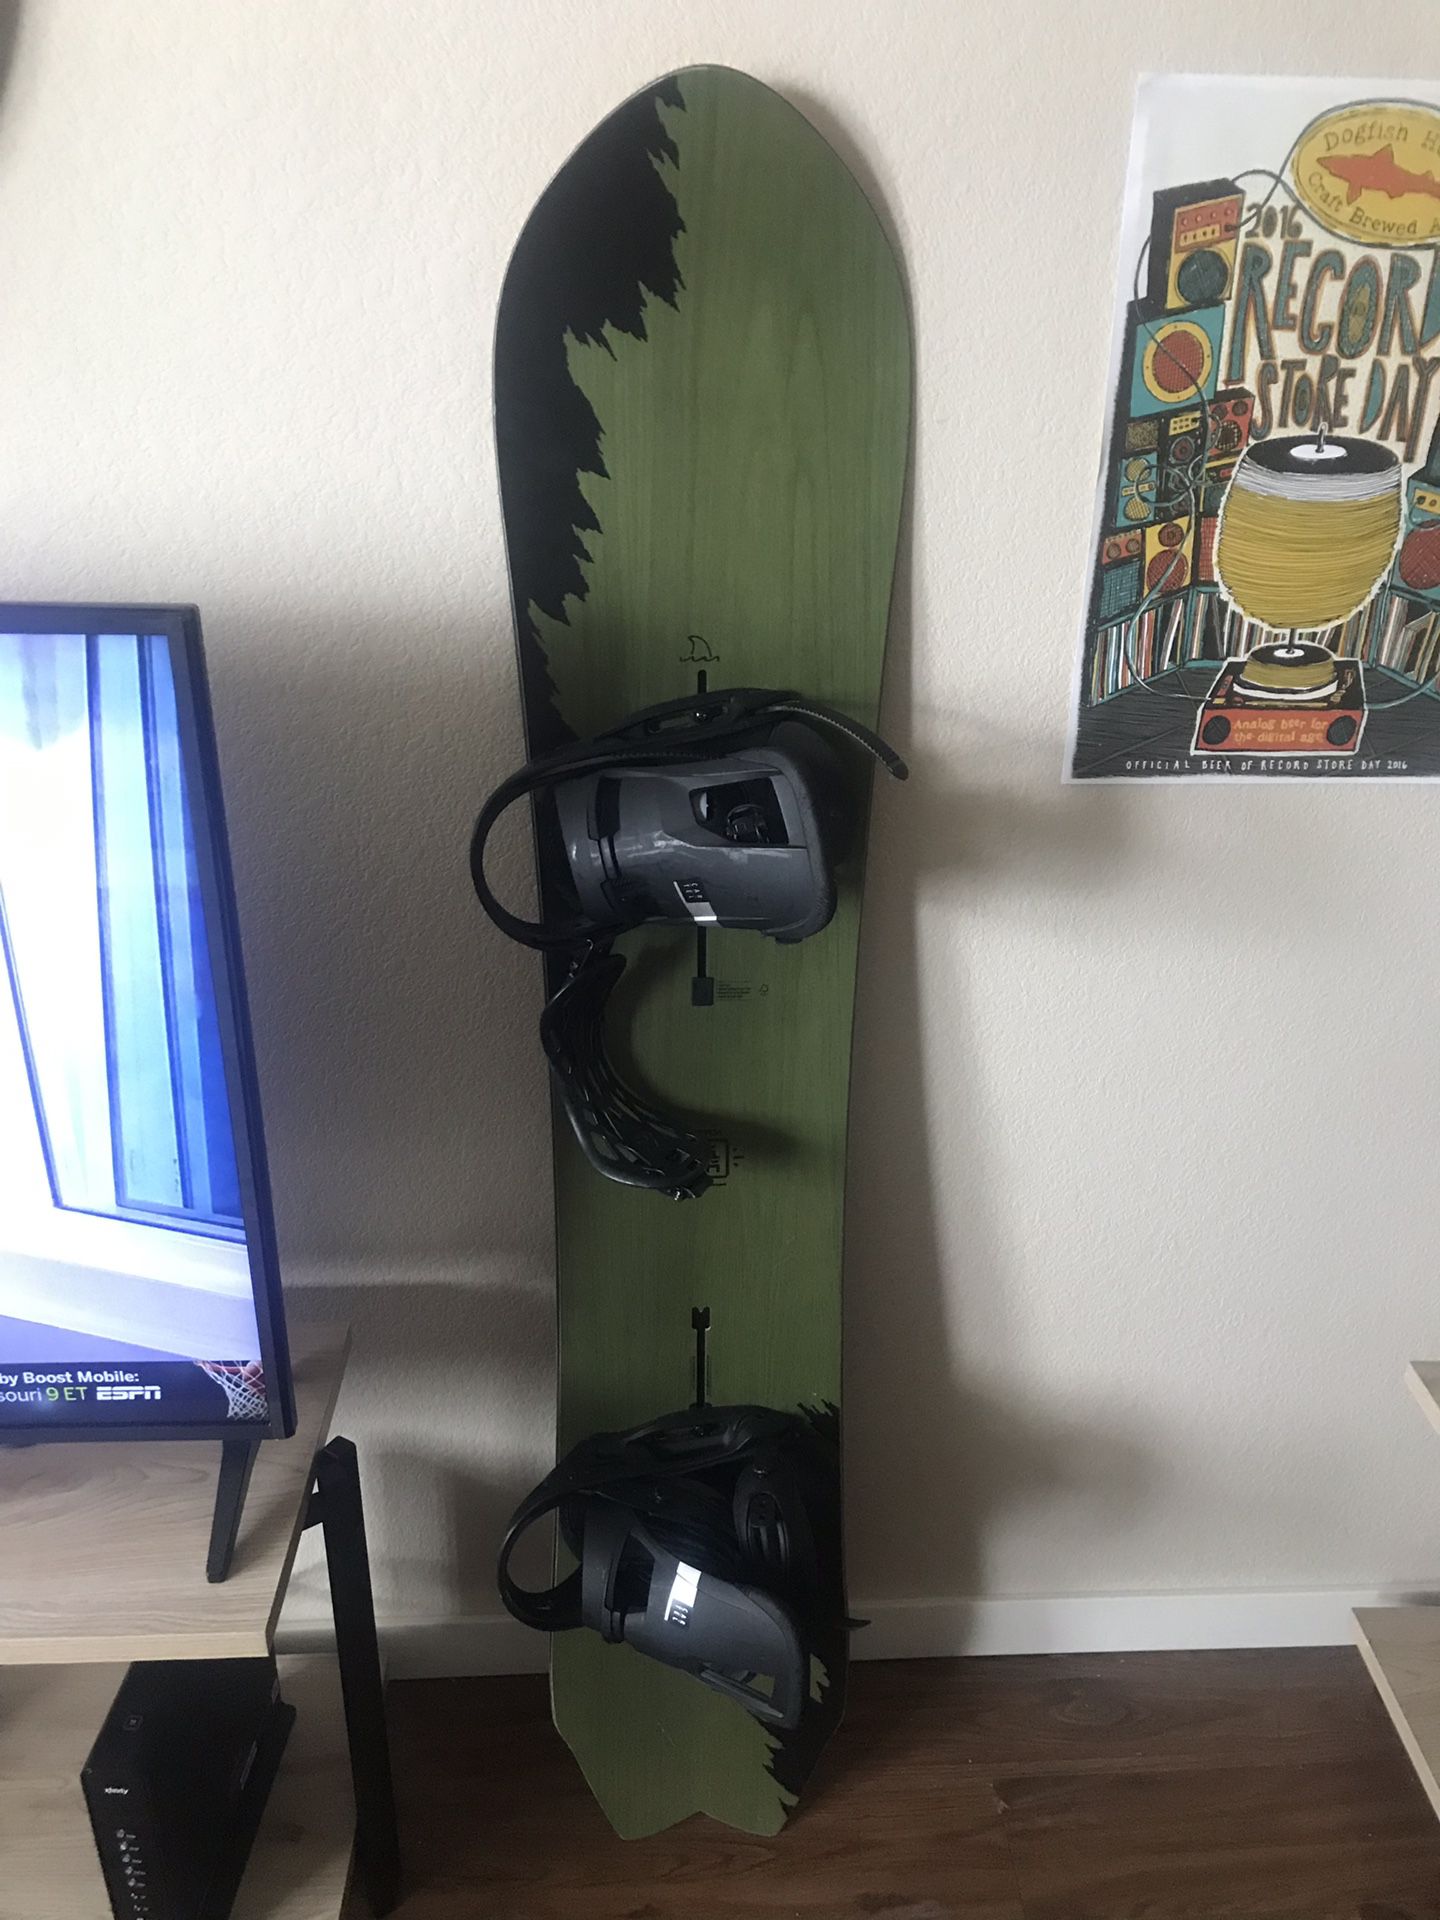 2018 BRAND NEW 162” Burton Fish with 2017 Burton Cartel Bindings. I’ve ridden this board once. Just not my style. But if you love deep powder, this i